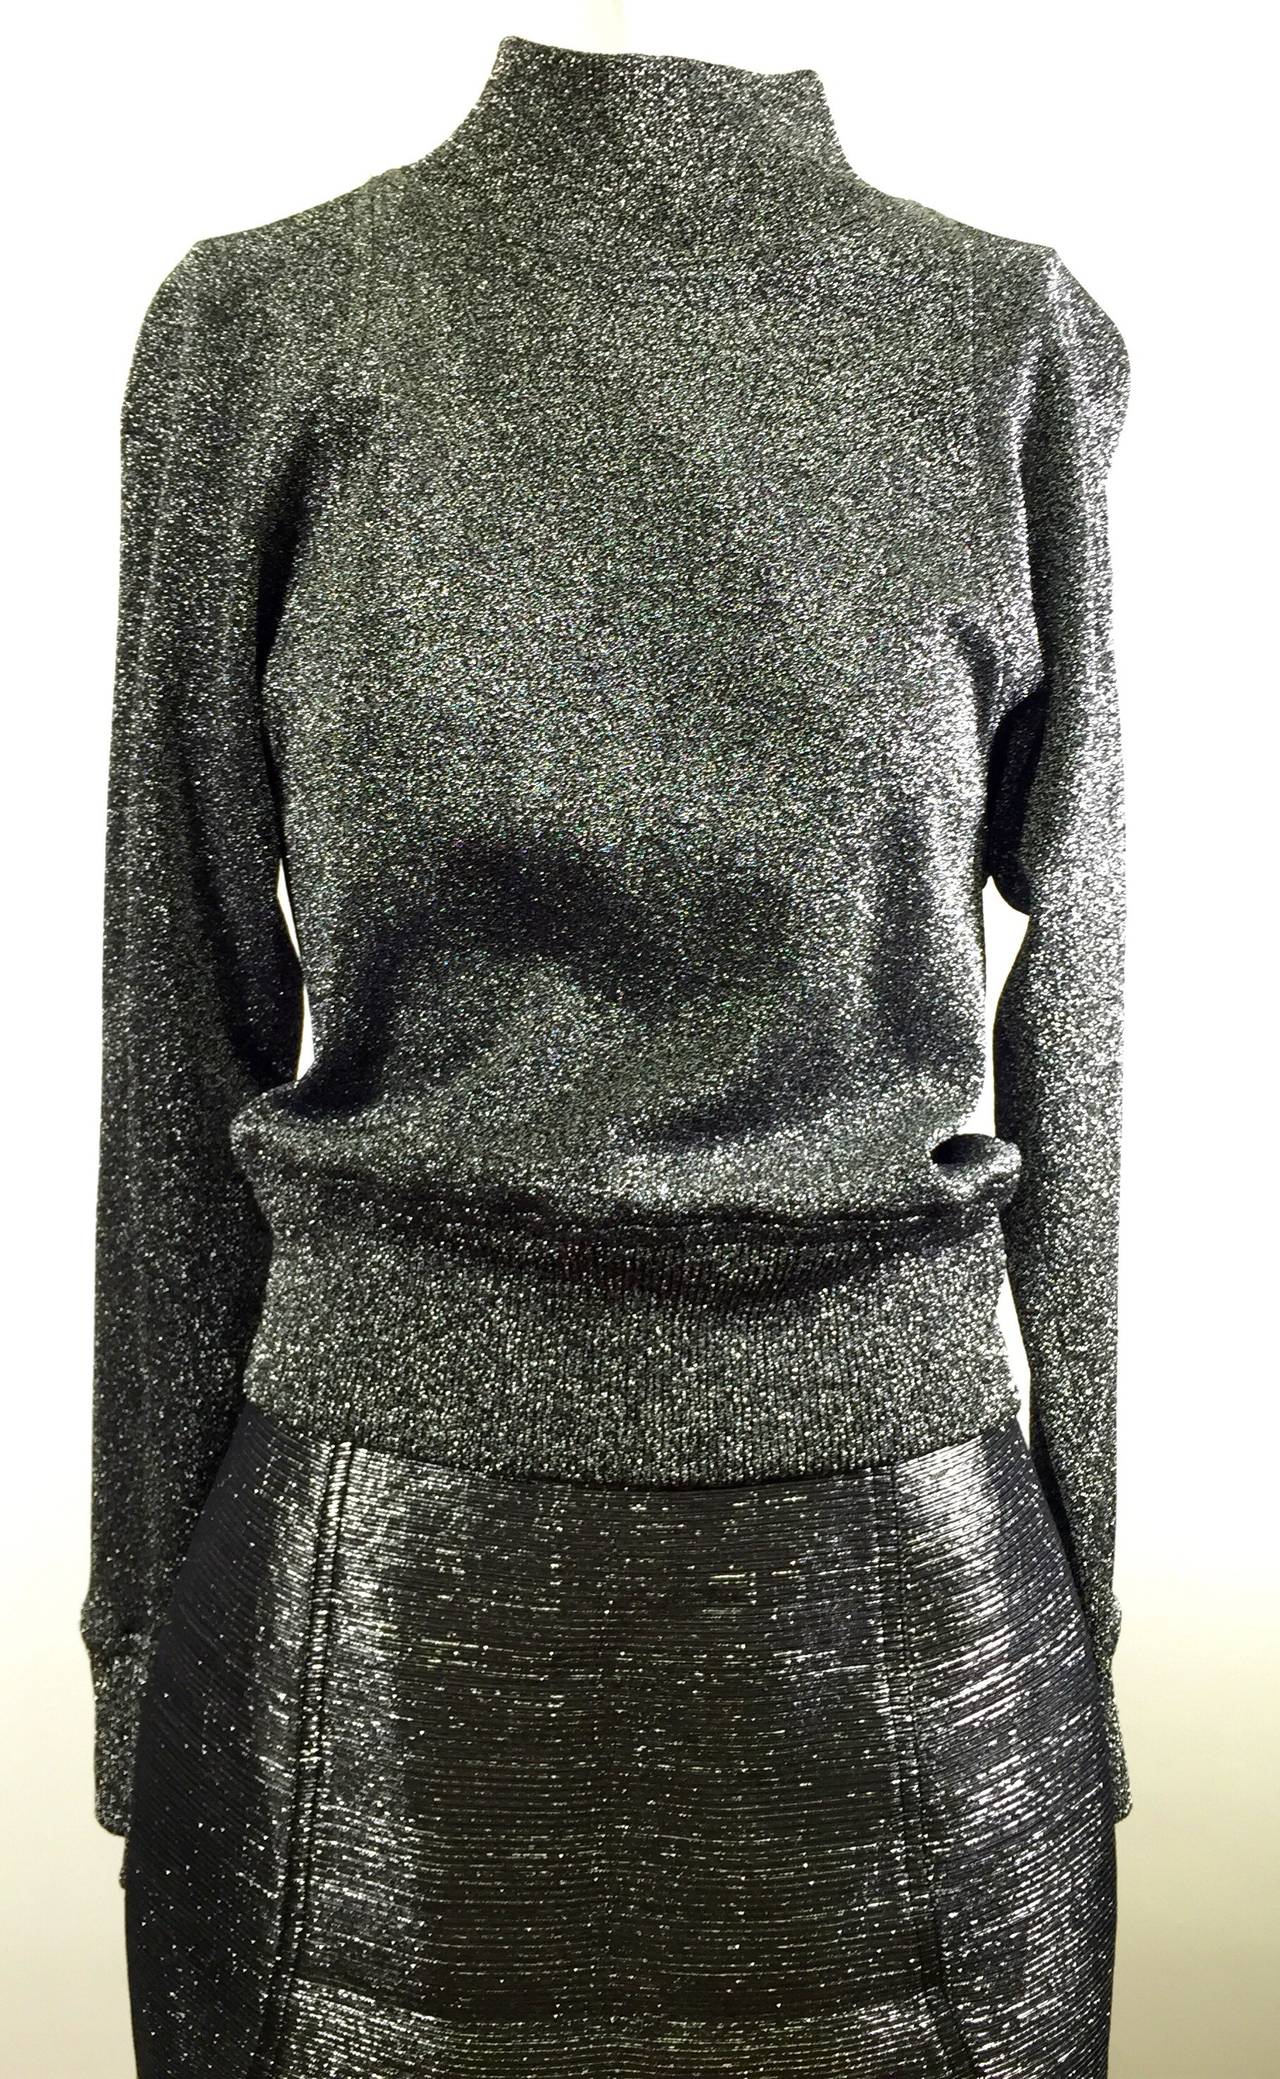 This is a rare Charles Jourdan Paris Silver Sweater & pencil Skirt
Made in France
Size 38

Measurement:
Sweater Top  65% cupro 35% polyester 
bust 34